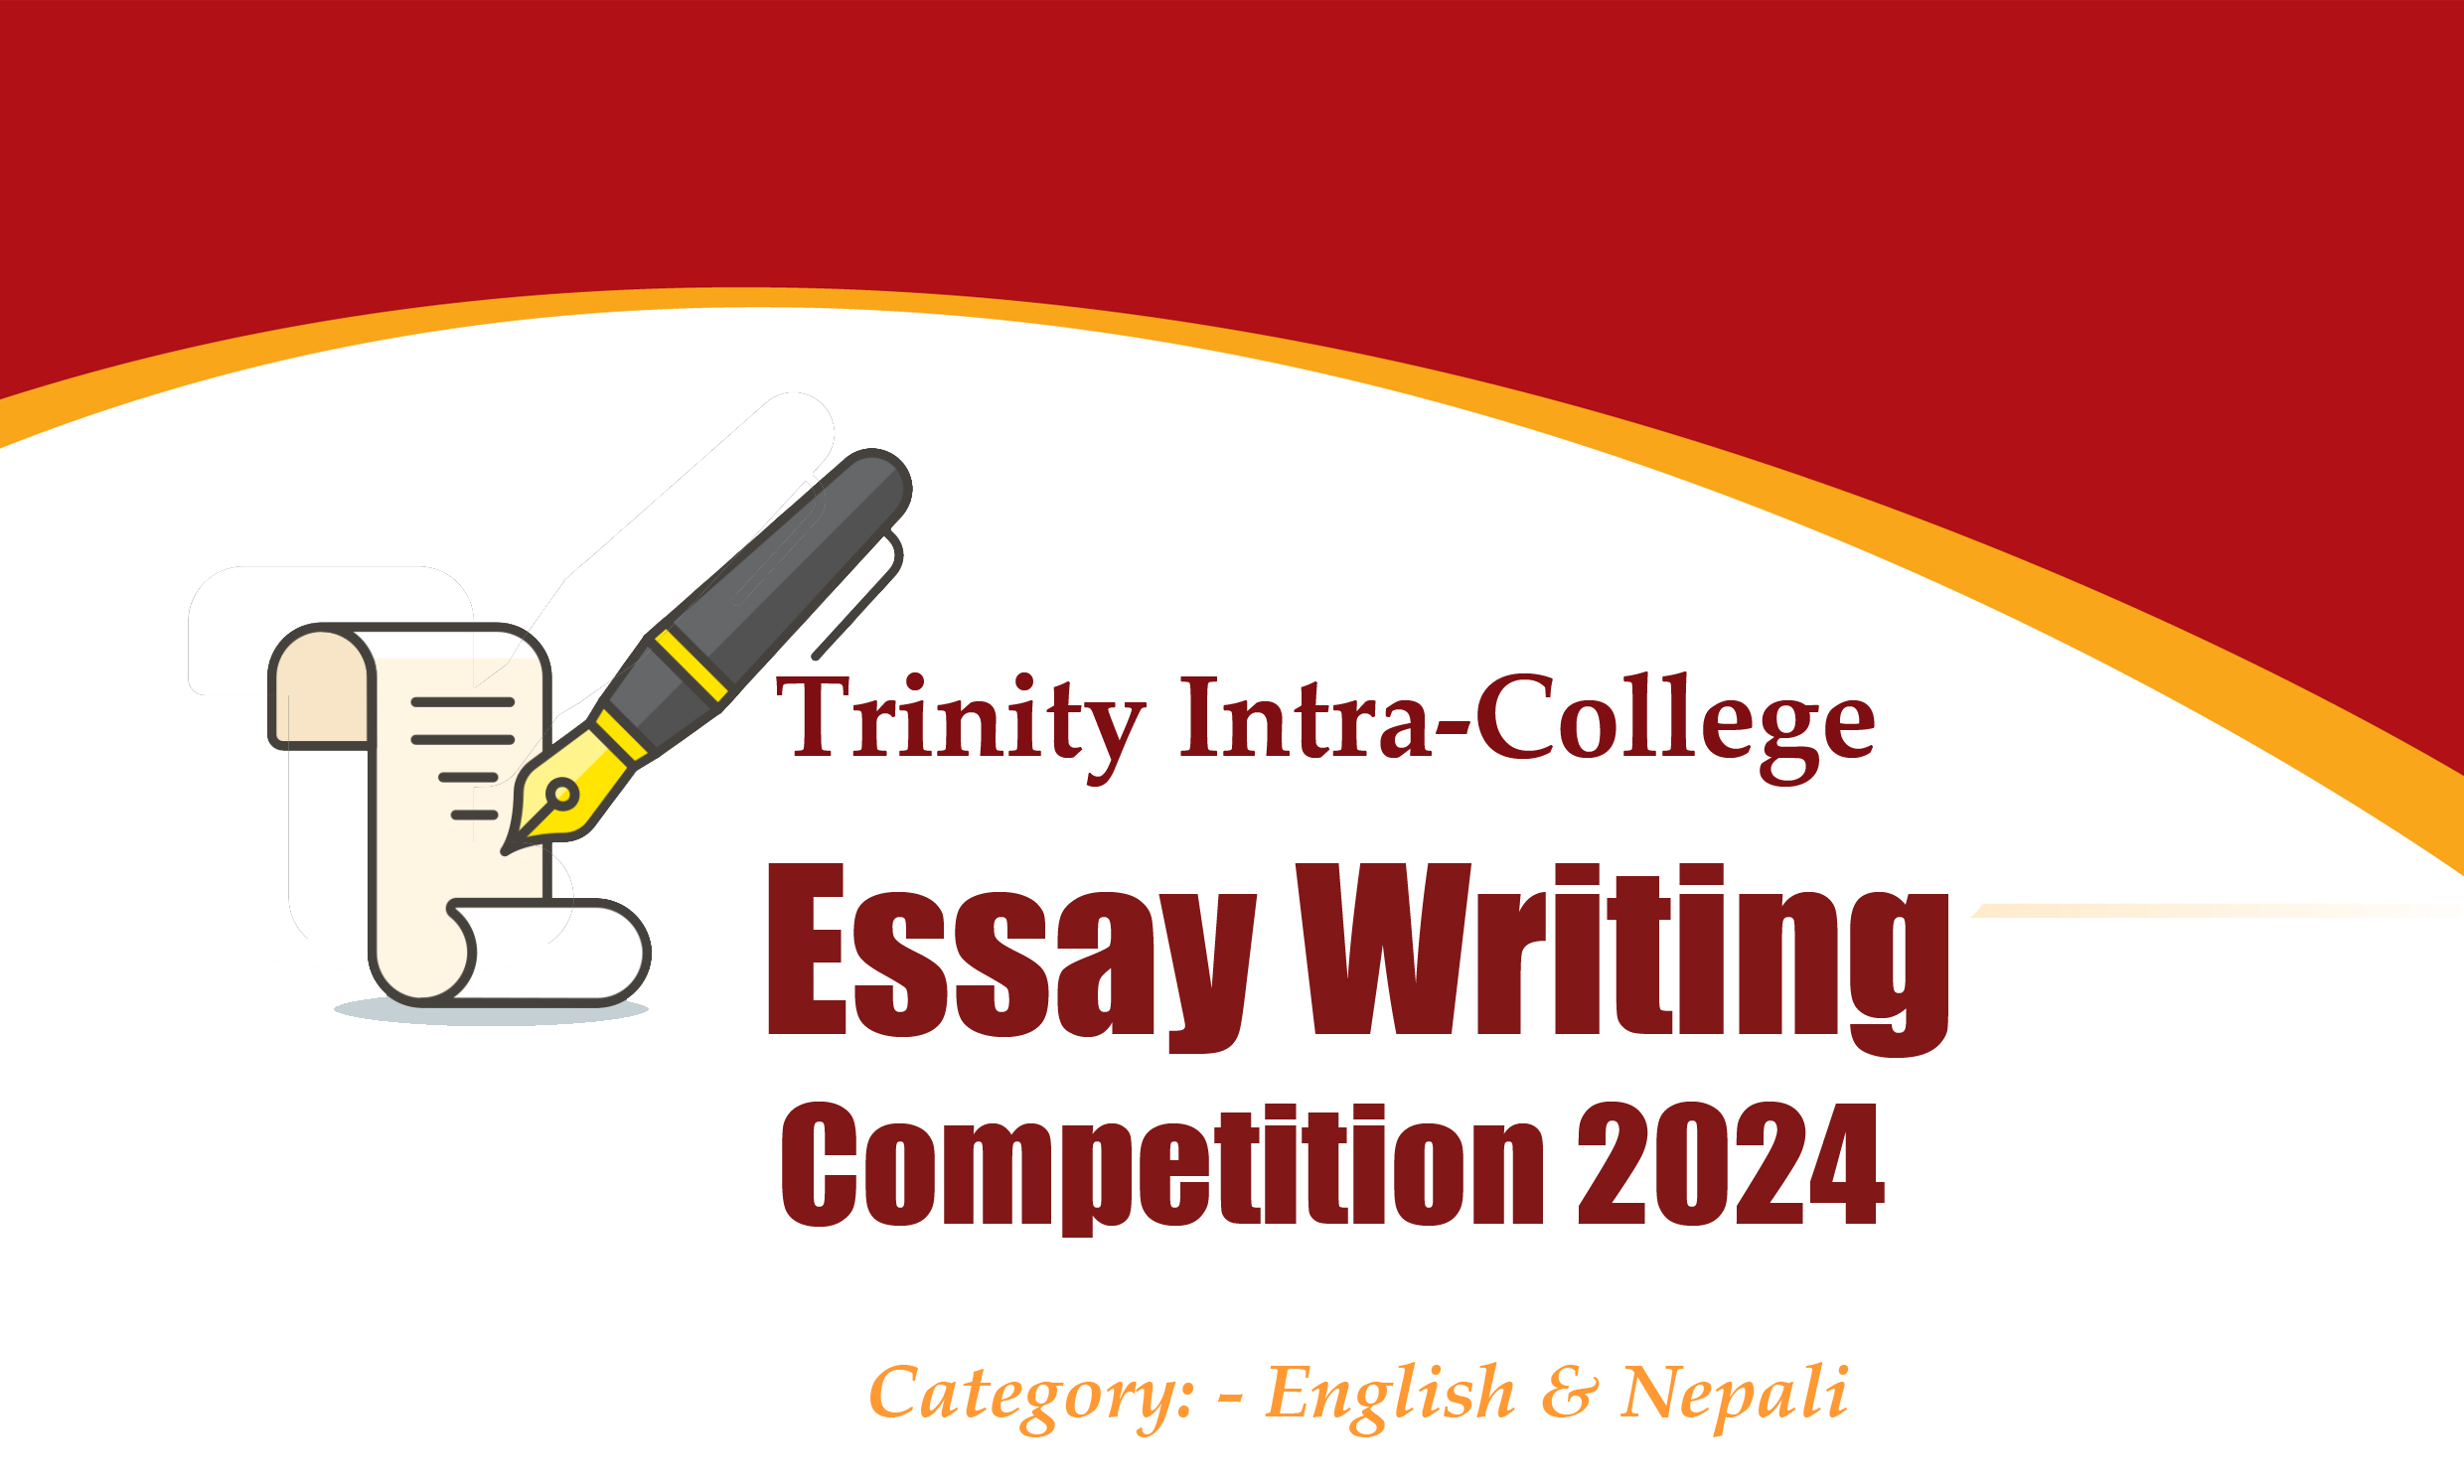 17th Intra-College Essay Writing Competition